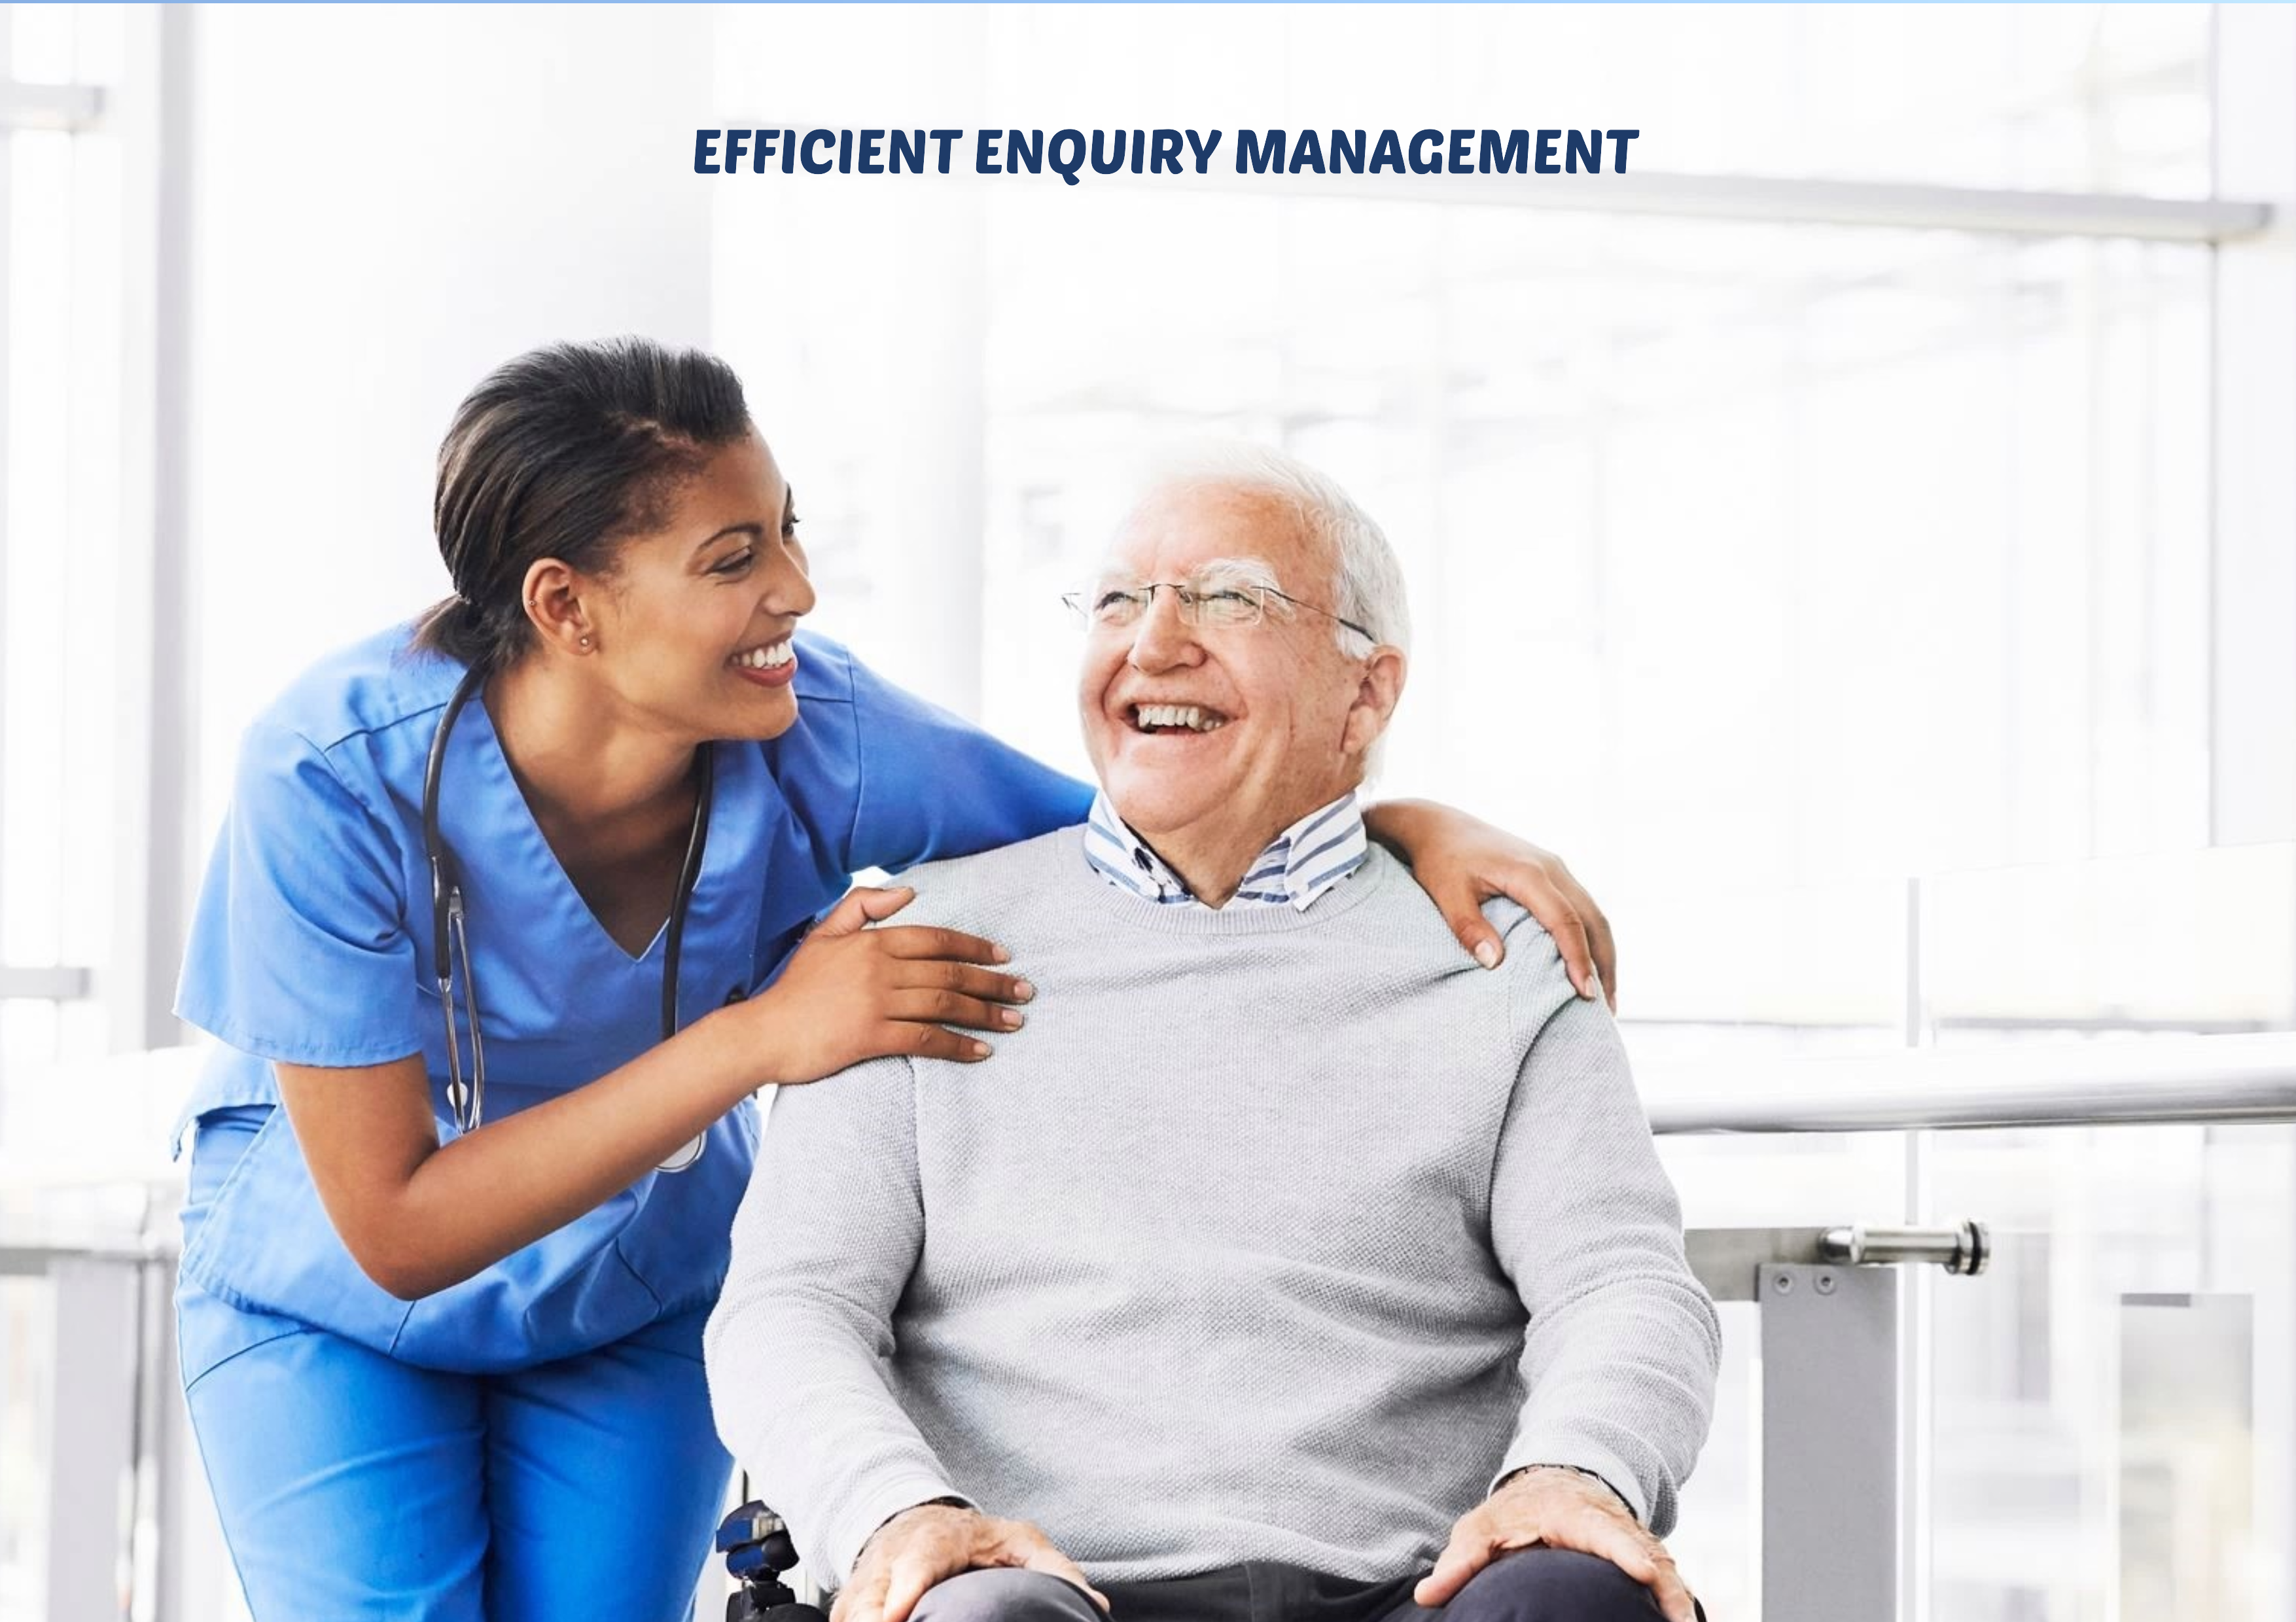 Aged Care Software Case and Enquiry management